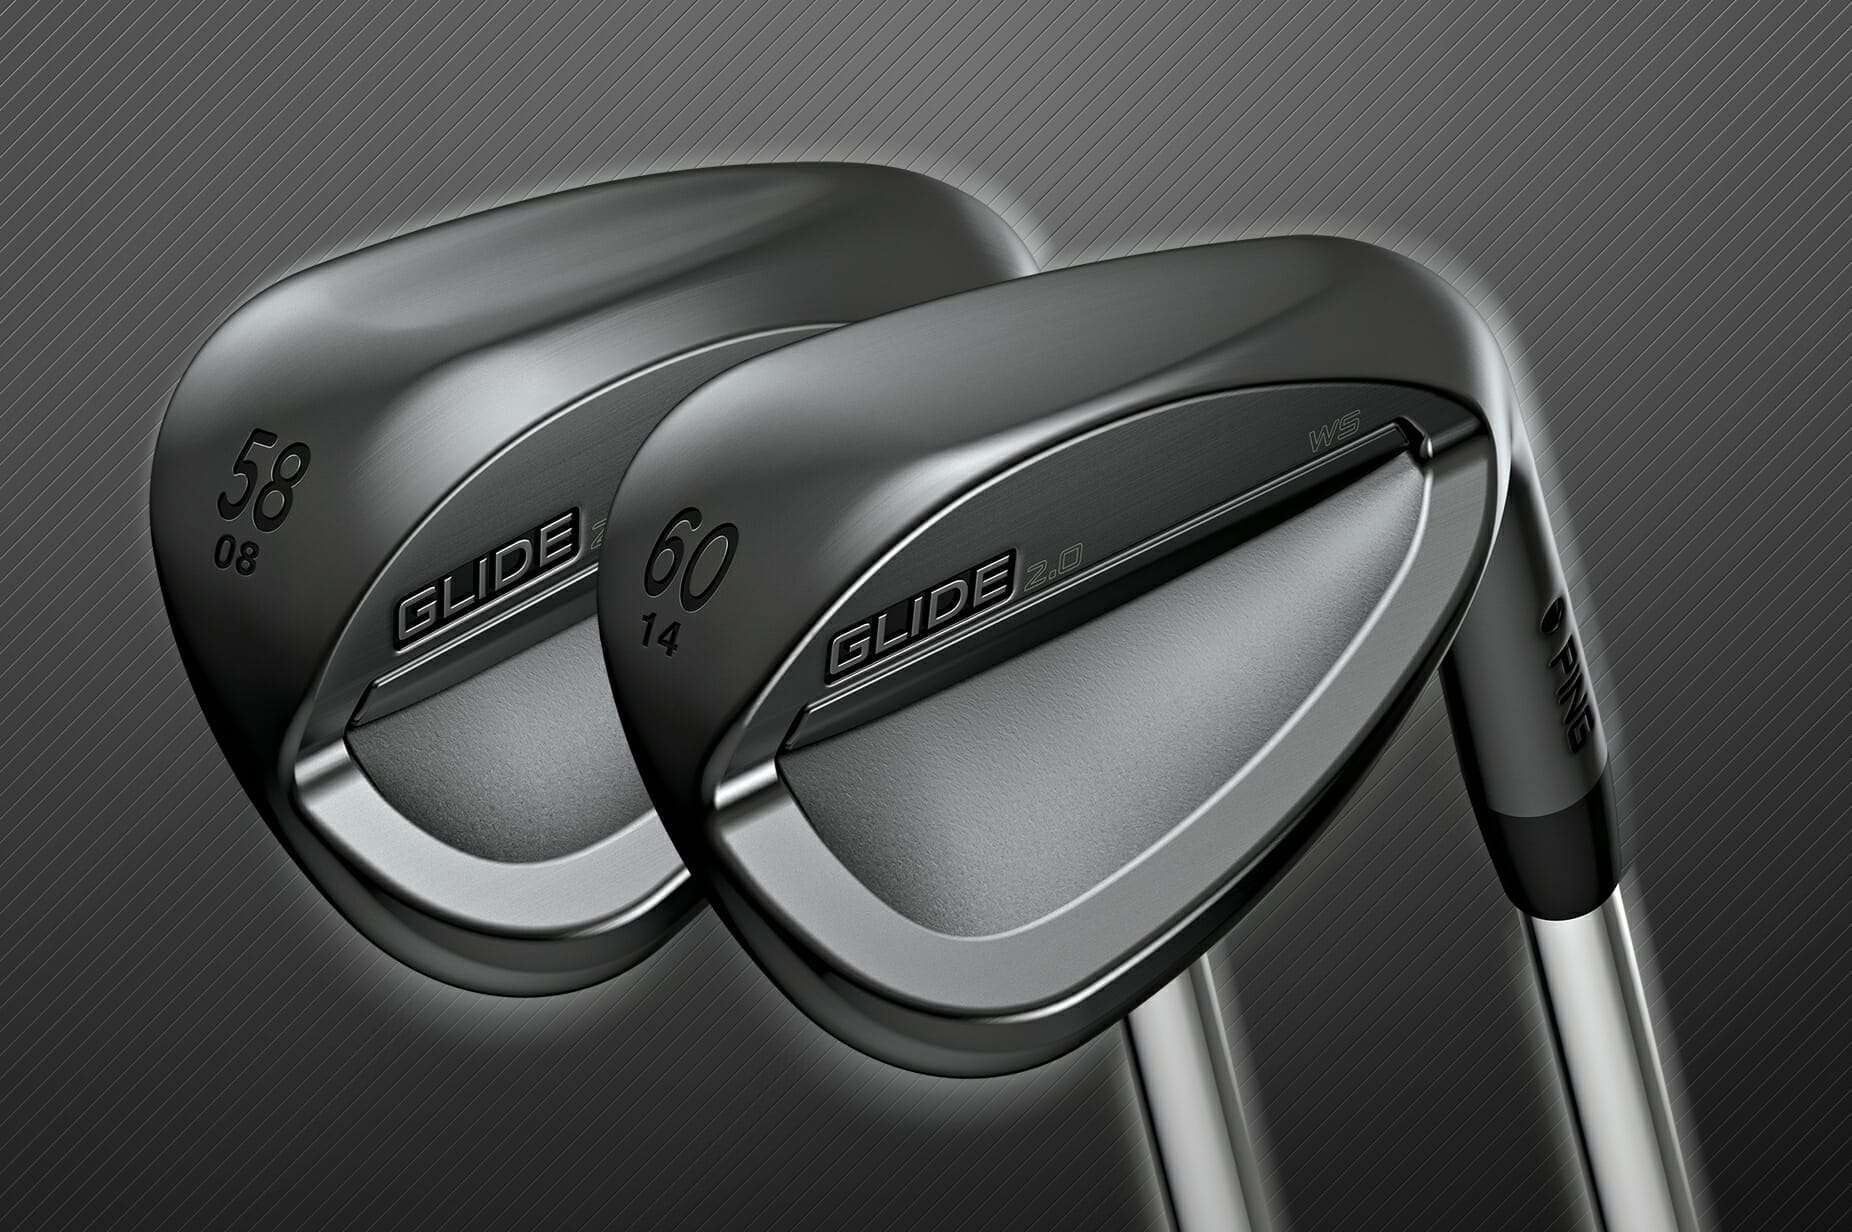 Ping reveal new Glide 2.0 Stealth Wedges for 2018